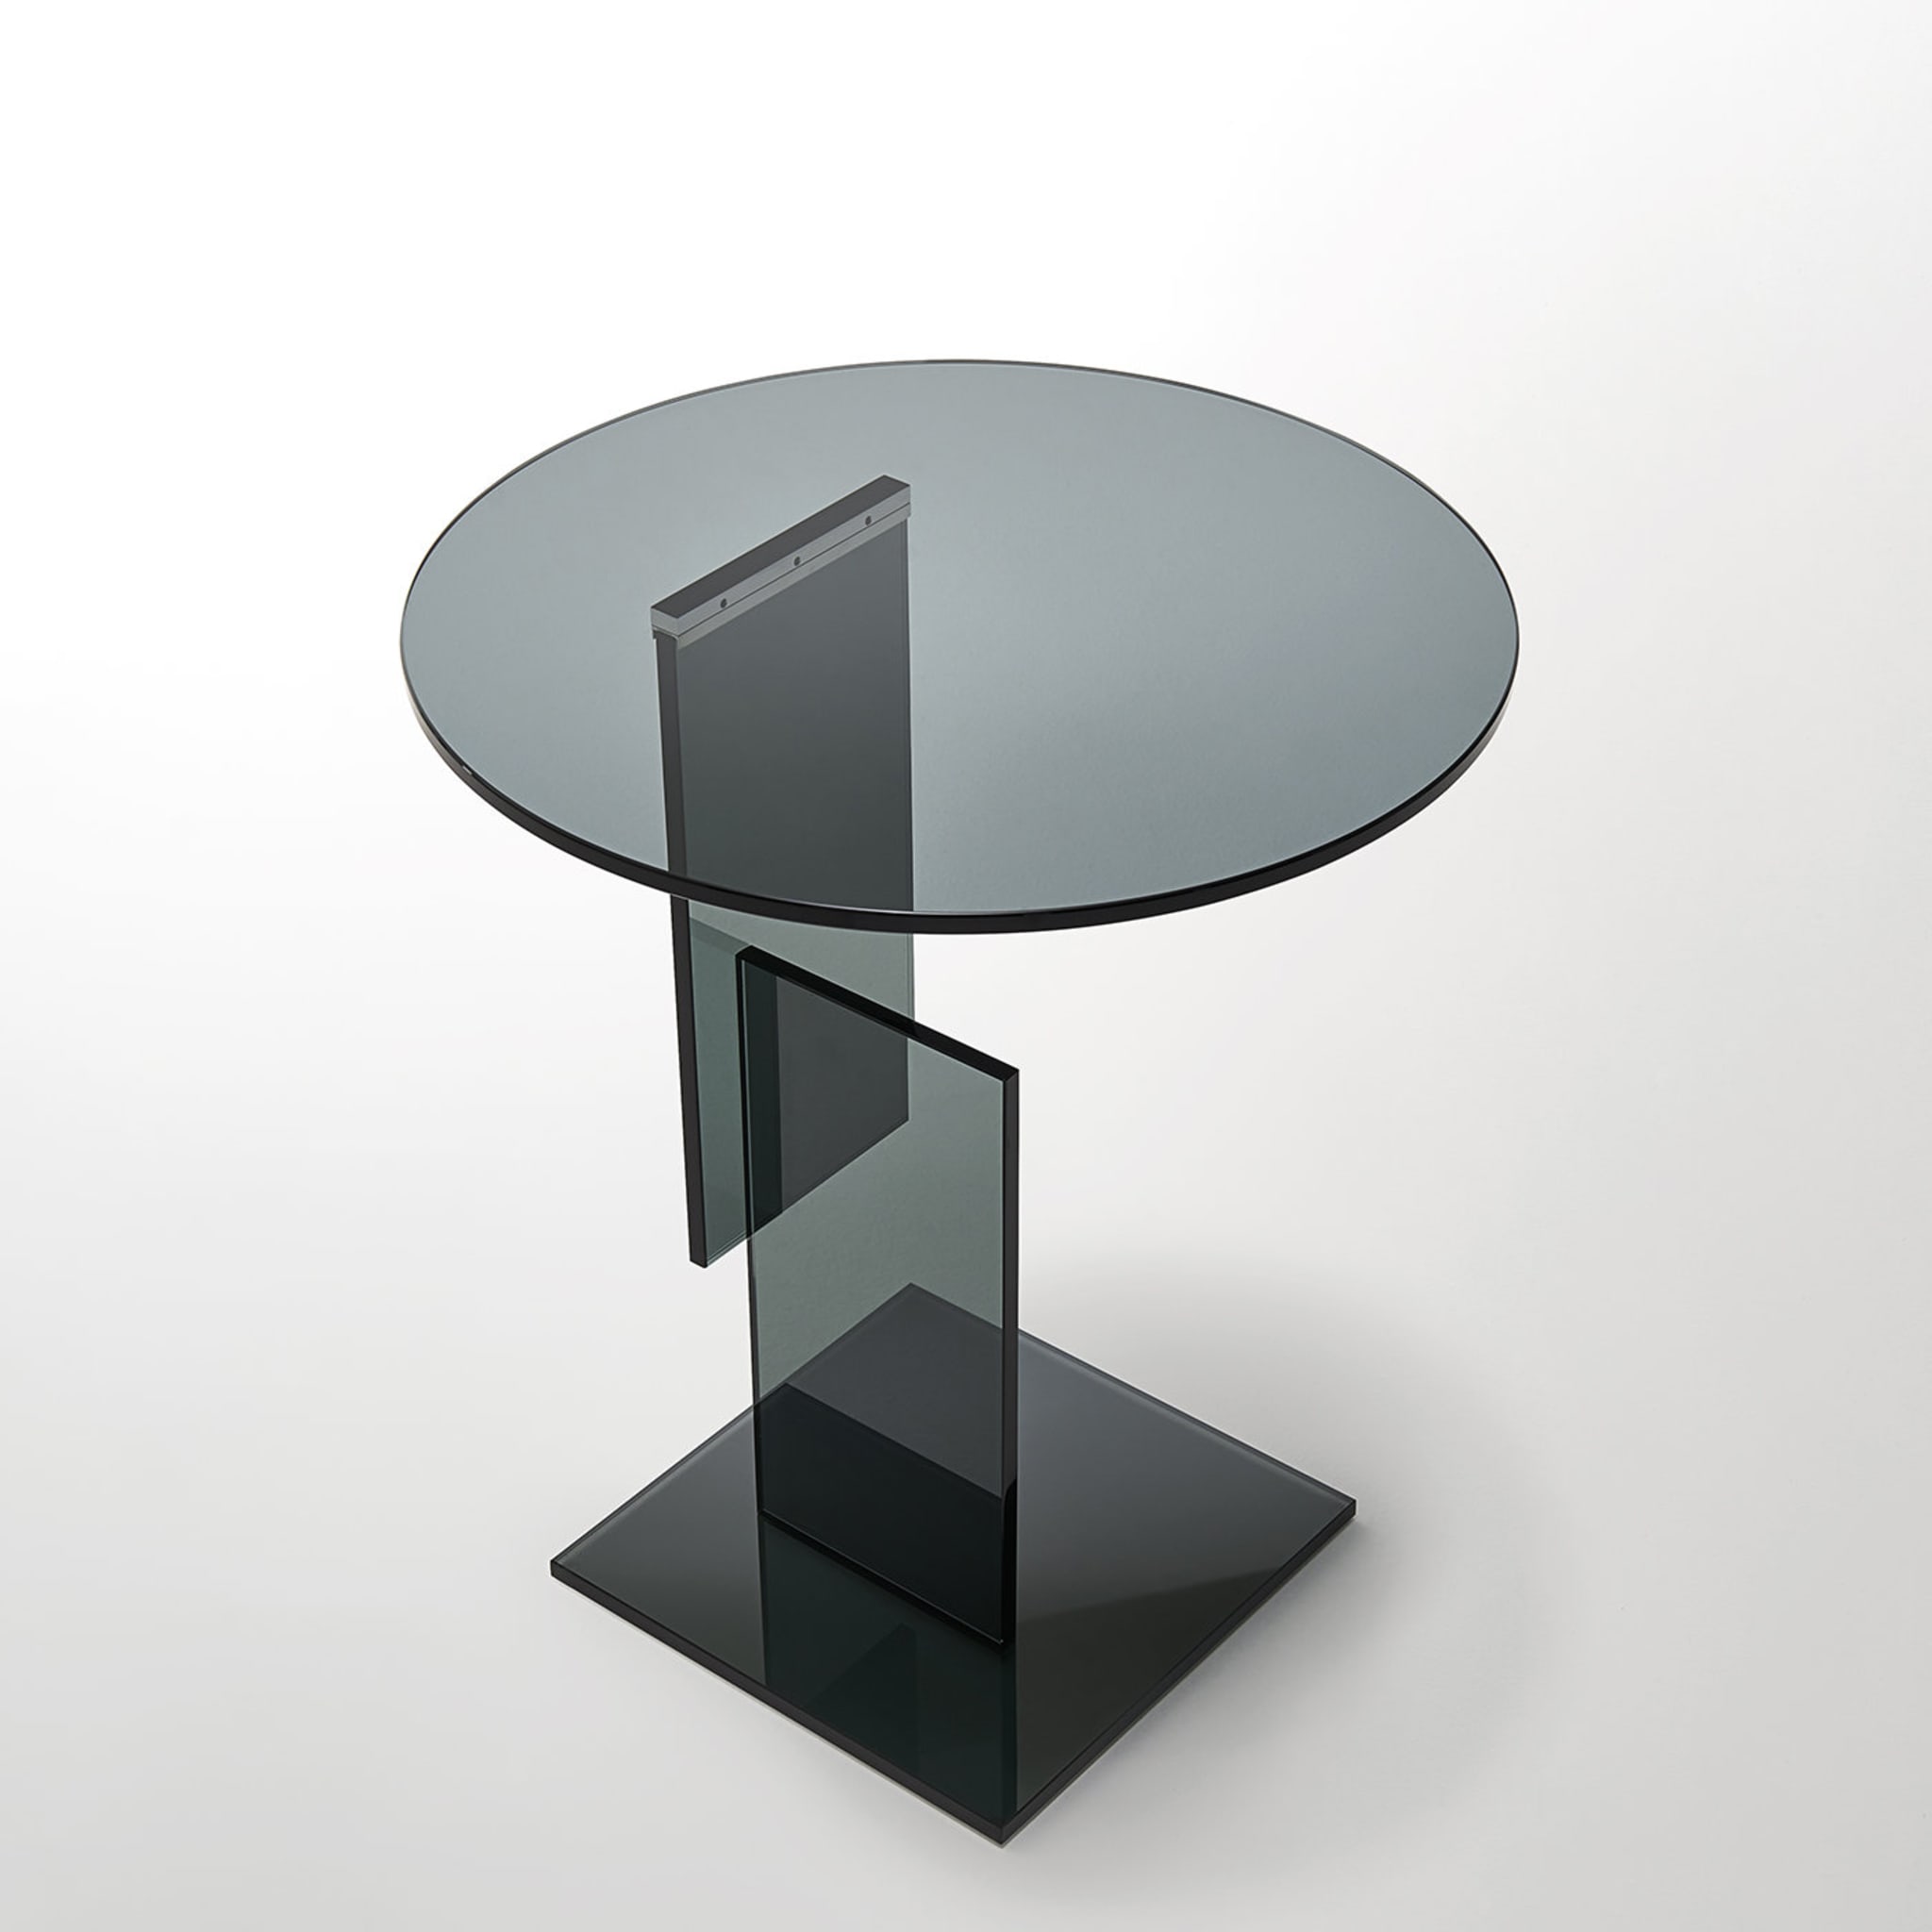 Don Gerrit All-Gray Side Table by Jean-Marie Massaud - Alternative view 1